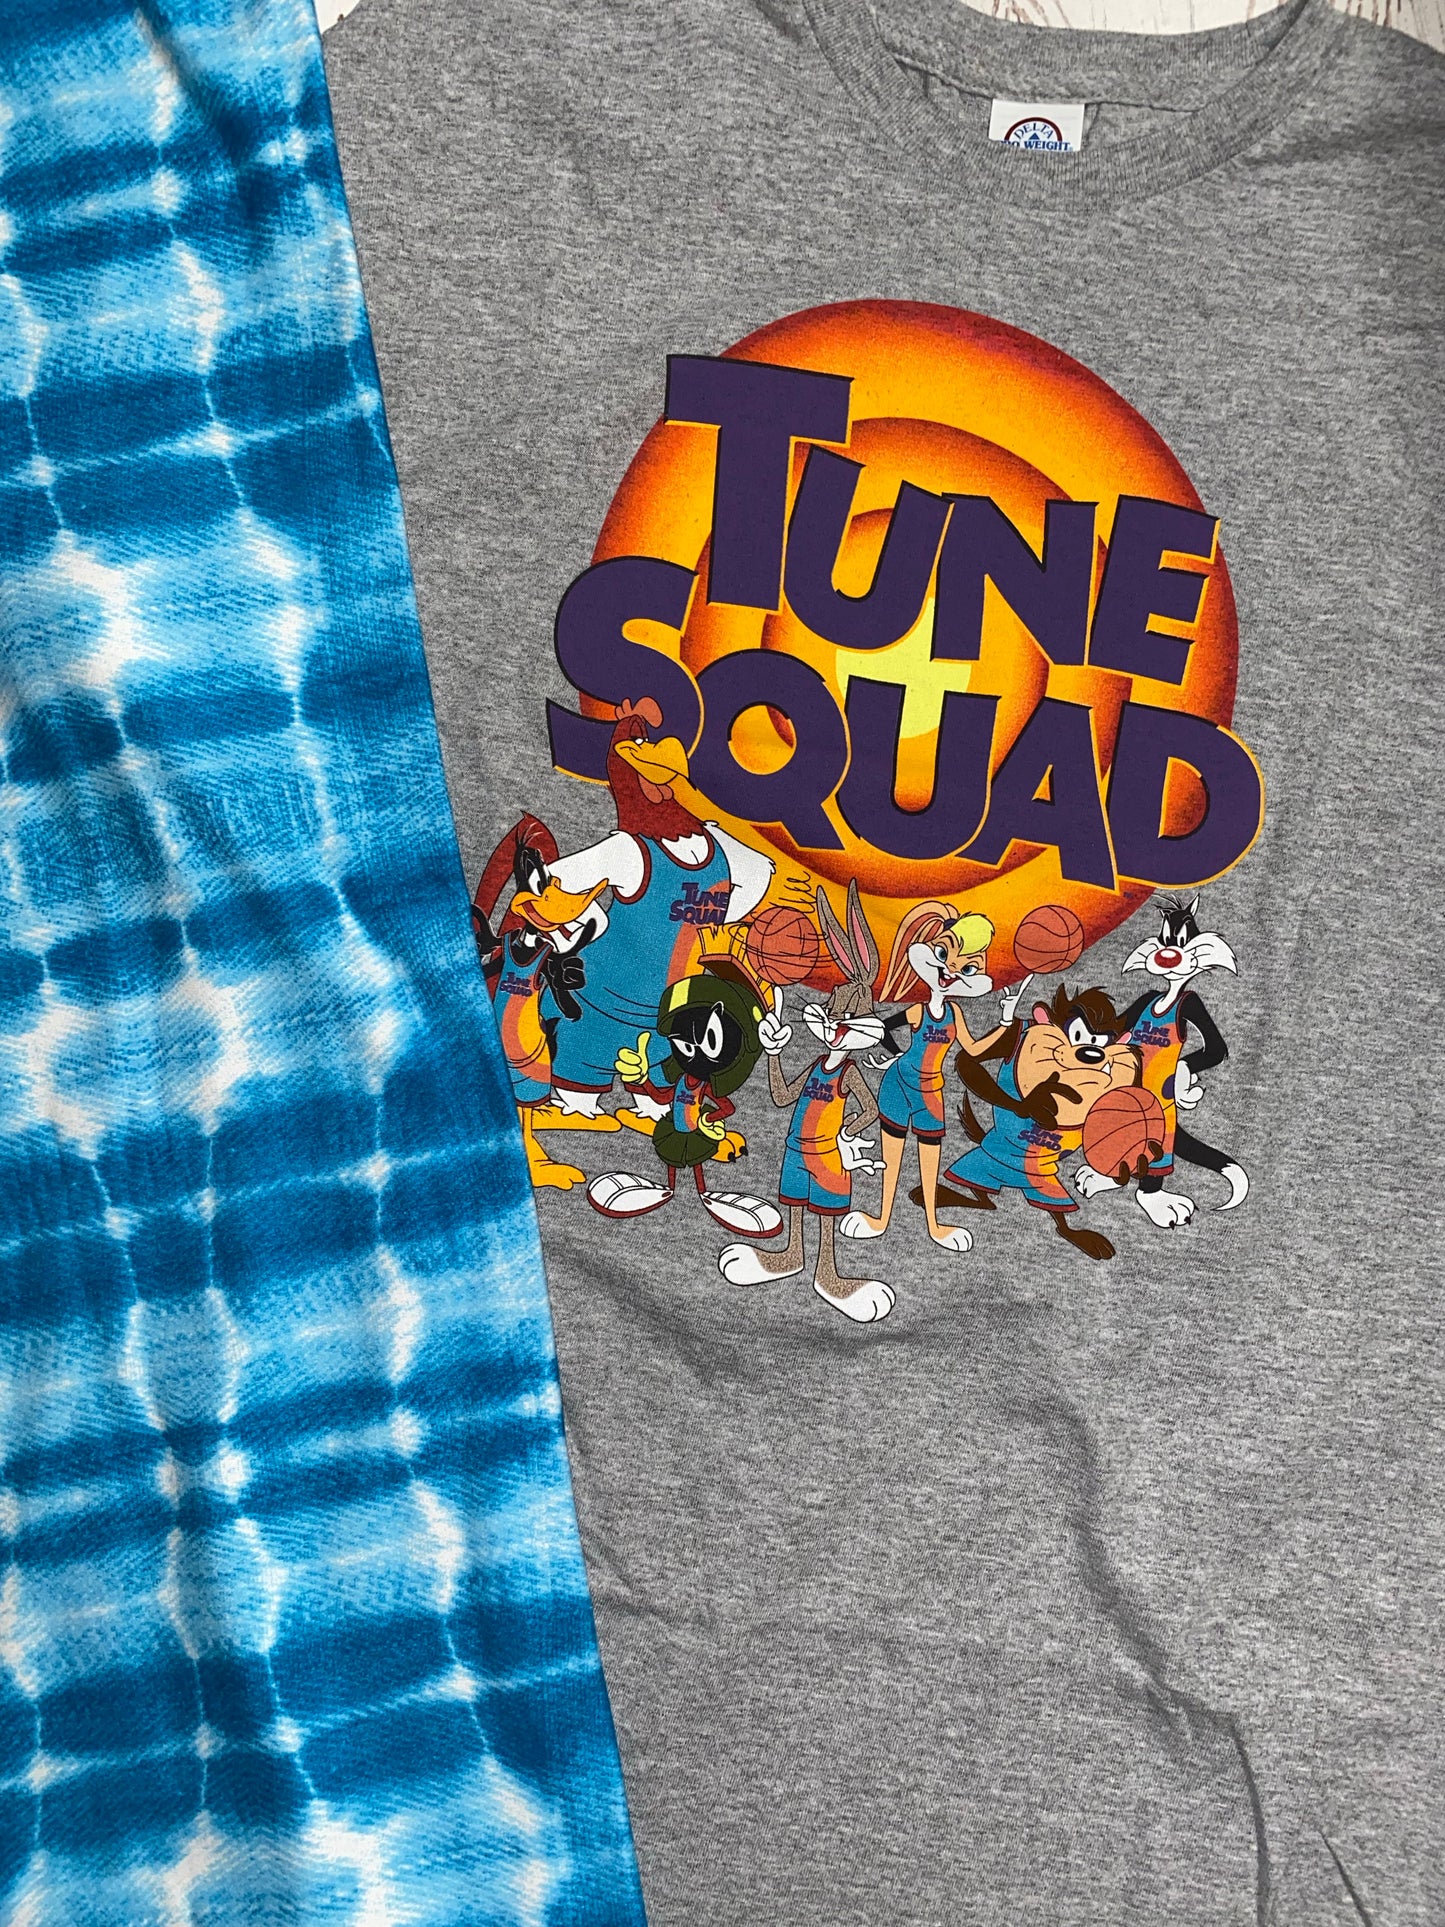 Tune Squad upcycled romper